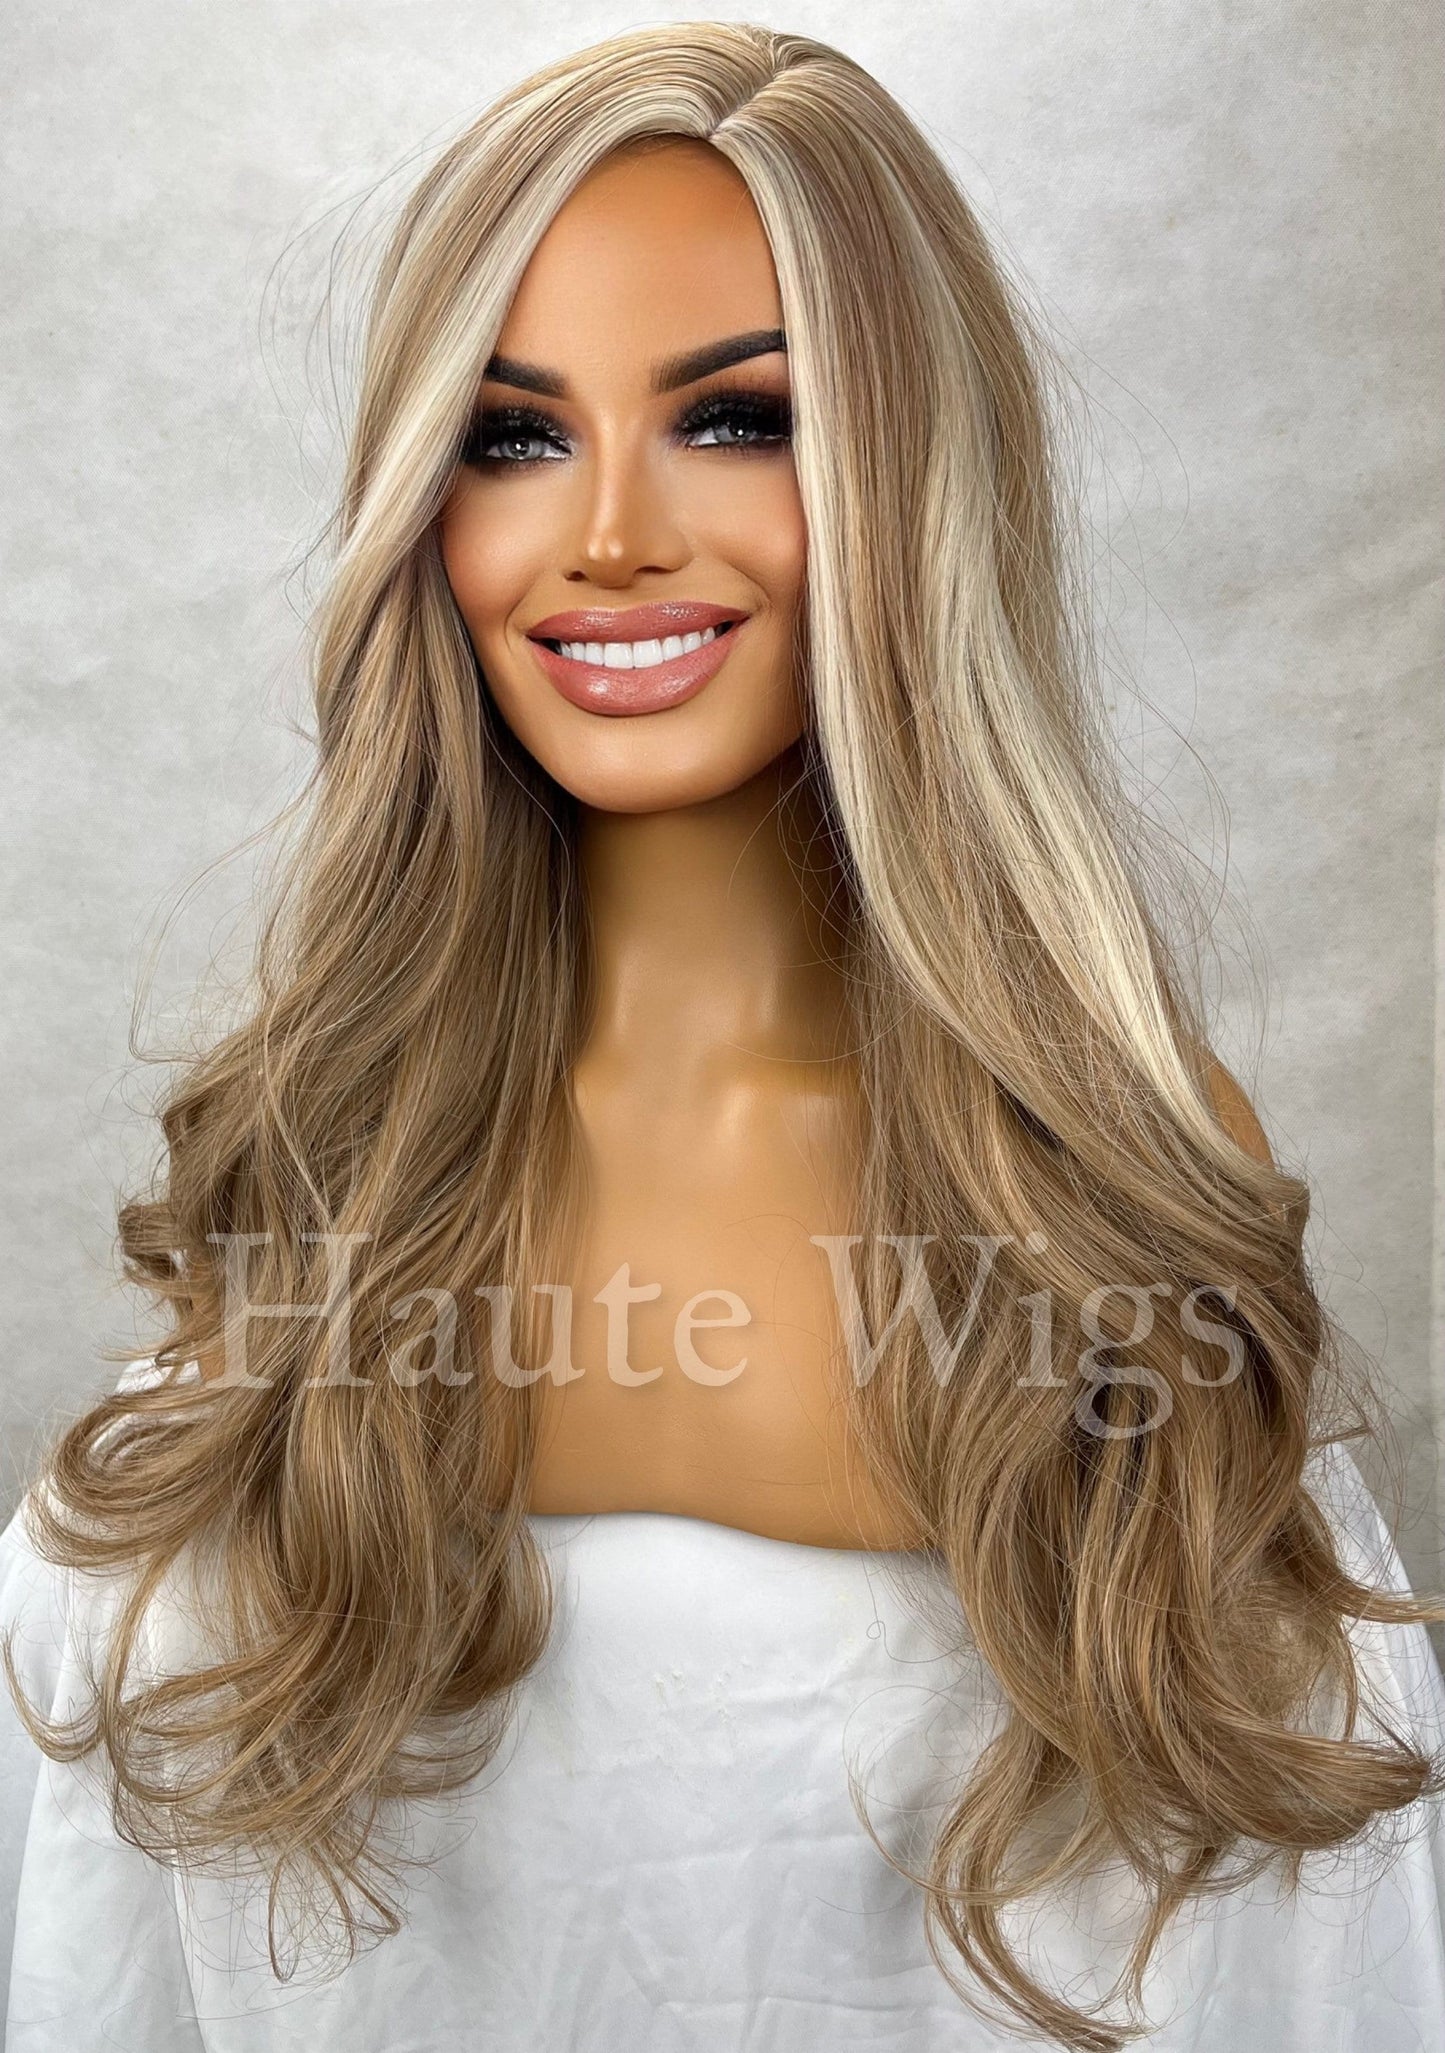 Venice Beach Honey Blonde Ash Highlights White Balayage streaks 22 Inch Long womens Wig Straight Center Parting NO Lace Front Gift for her